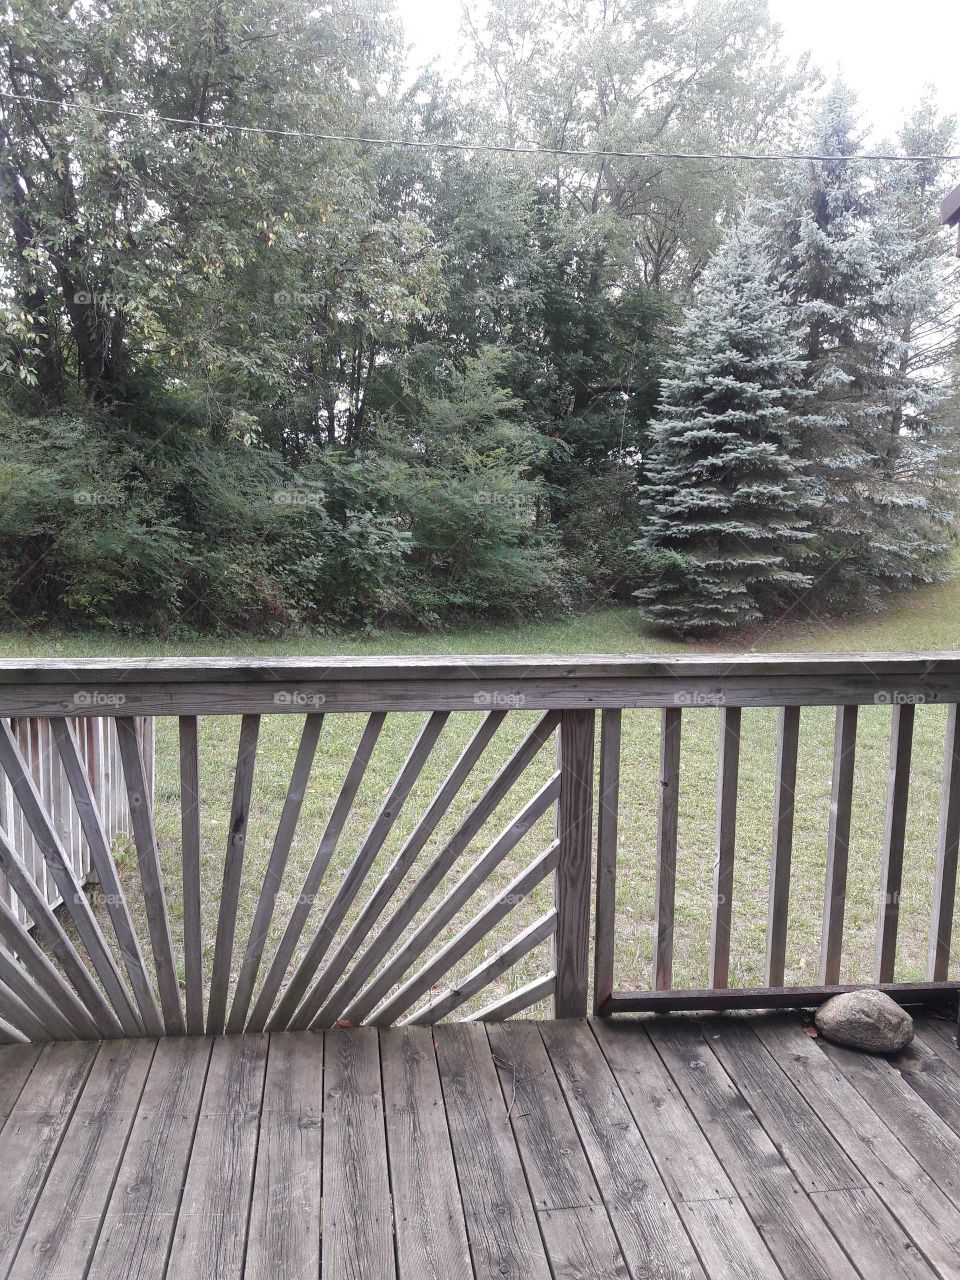 Backyard trees and deck in Northern Michigan